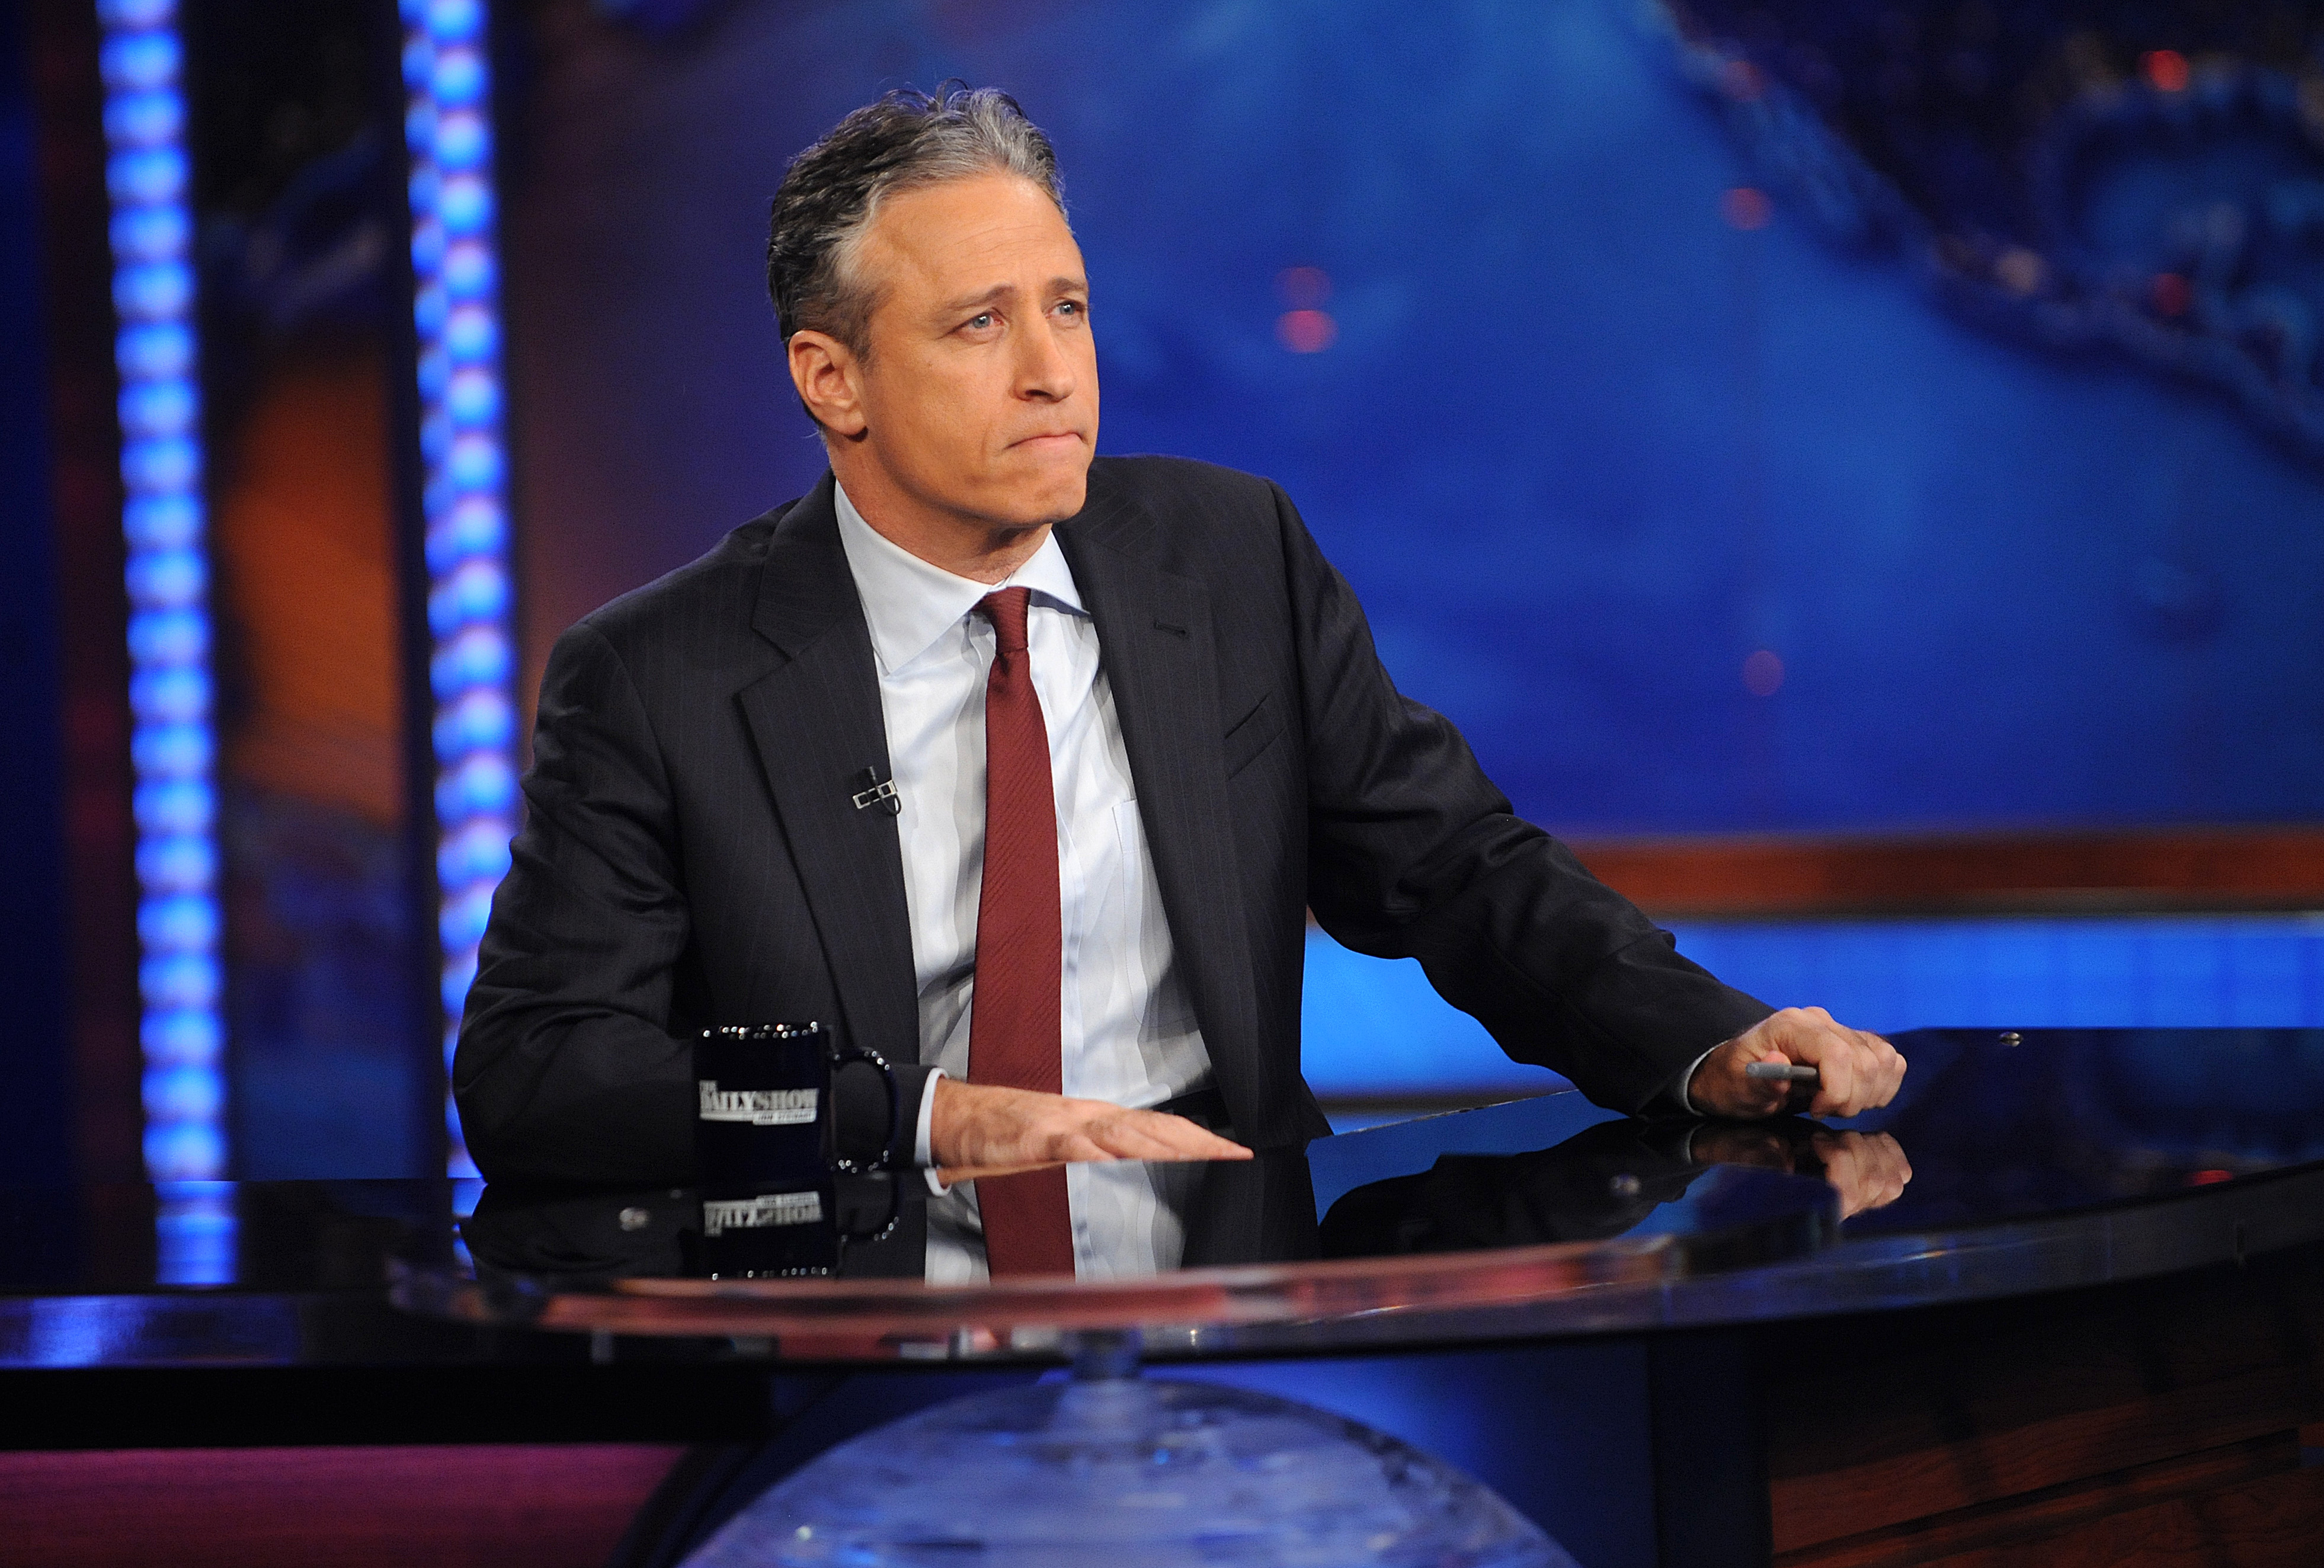 The Daily Show With Jon Stewart 4k Ultra HD Wallpaper Background